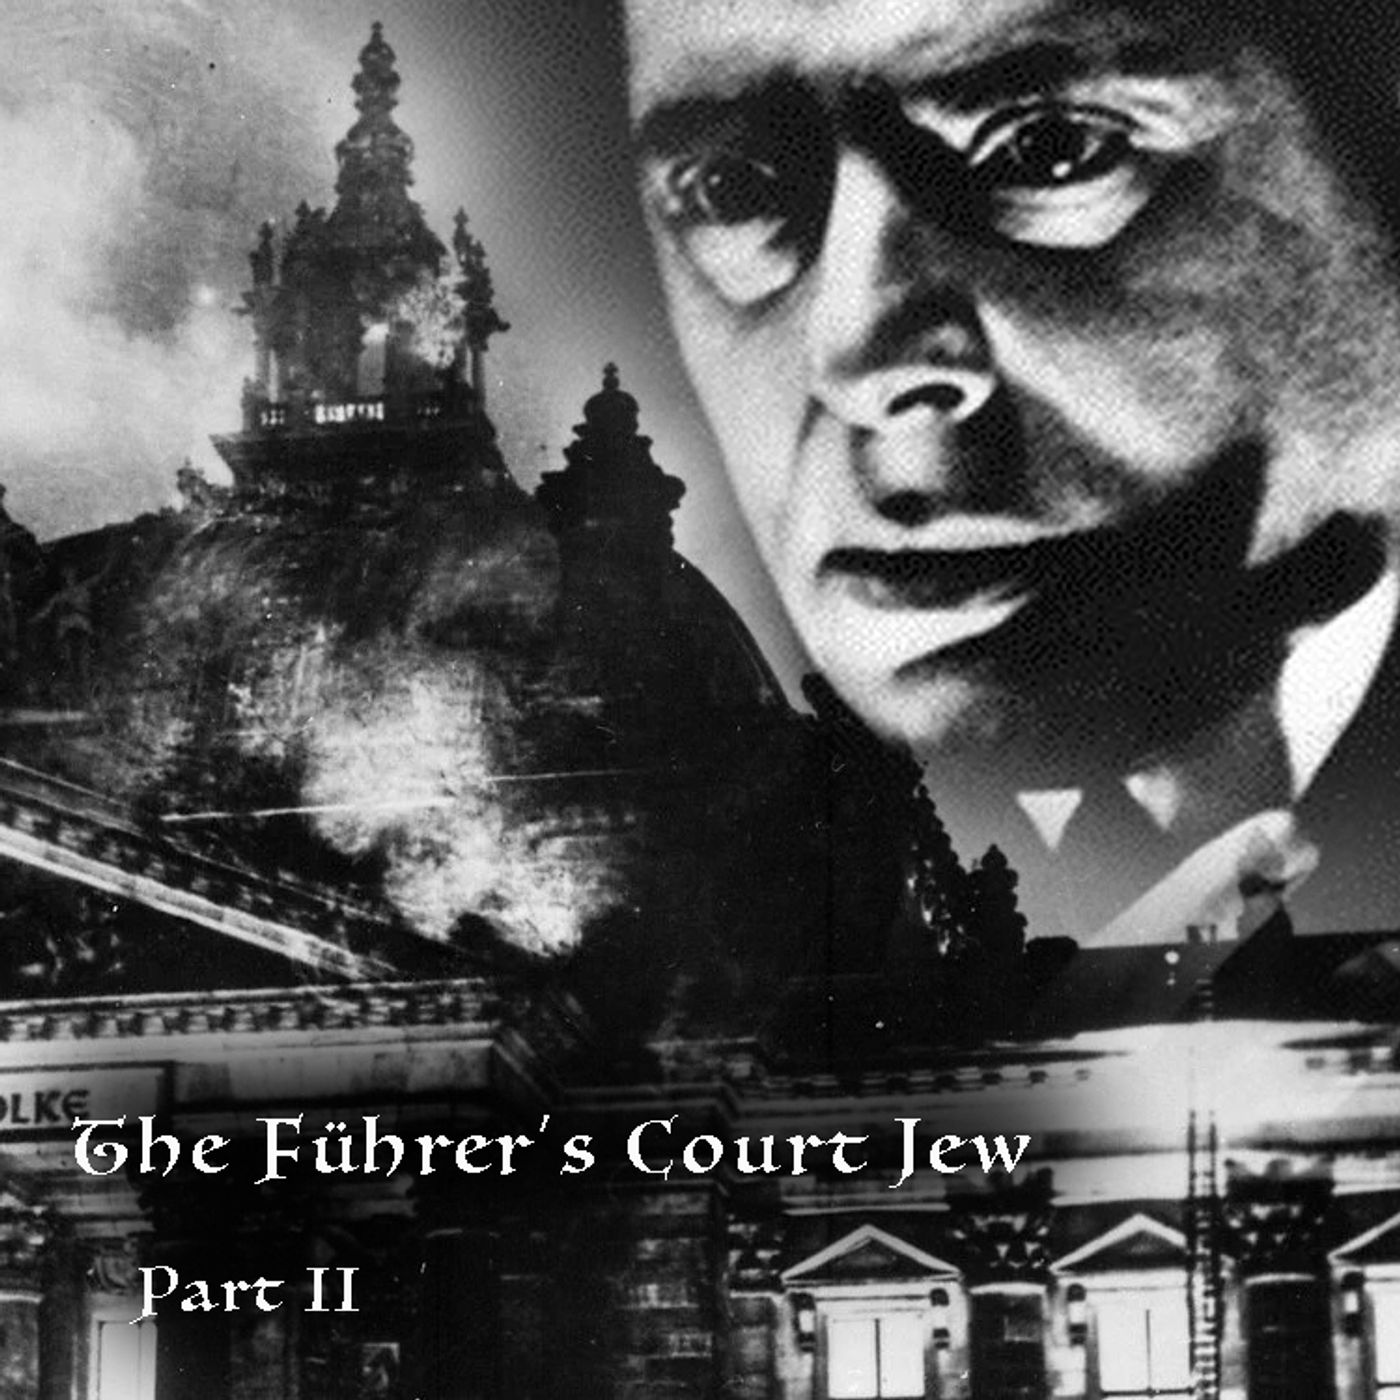 The Fuhrer’s Court Jew Part II: The Fall of Icarus